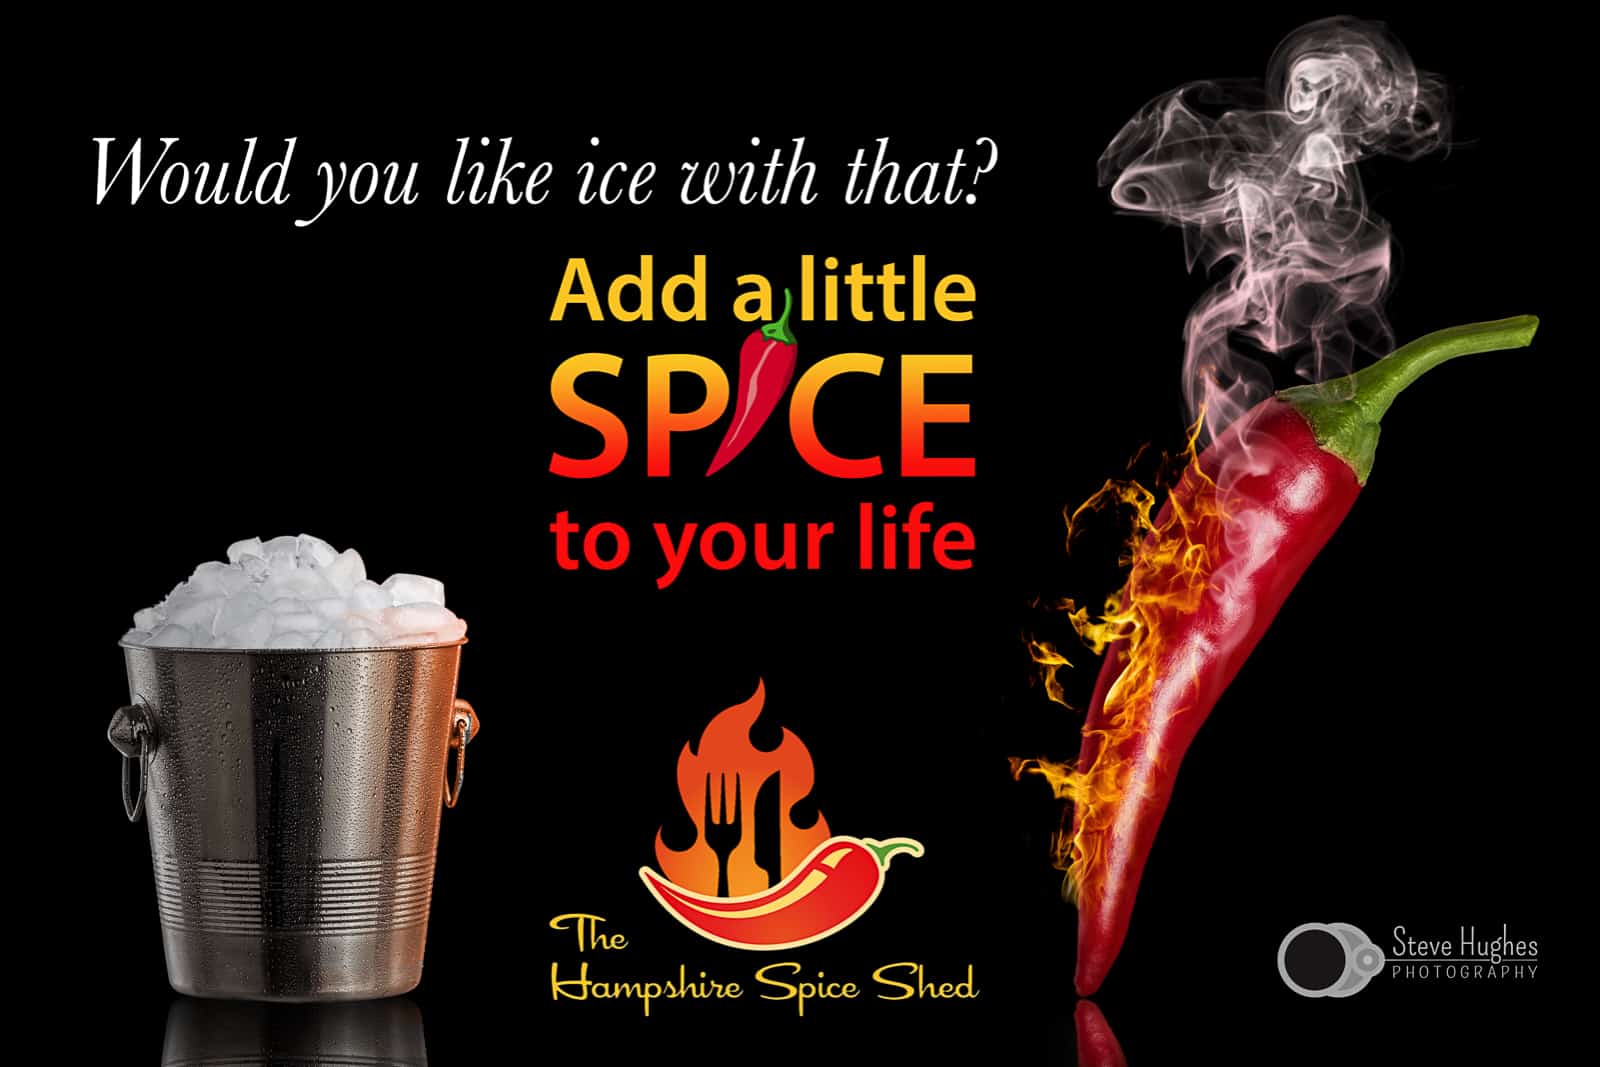 composite photograph of smoking red chillie pepper and silver ice bucket on black background